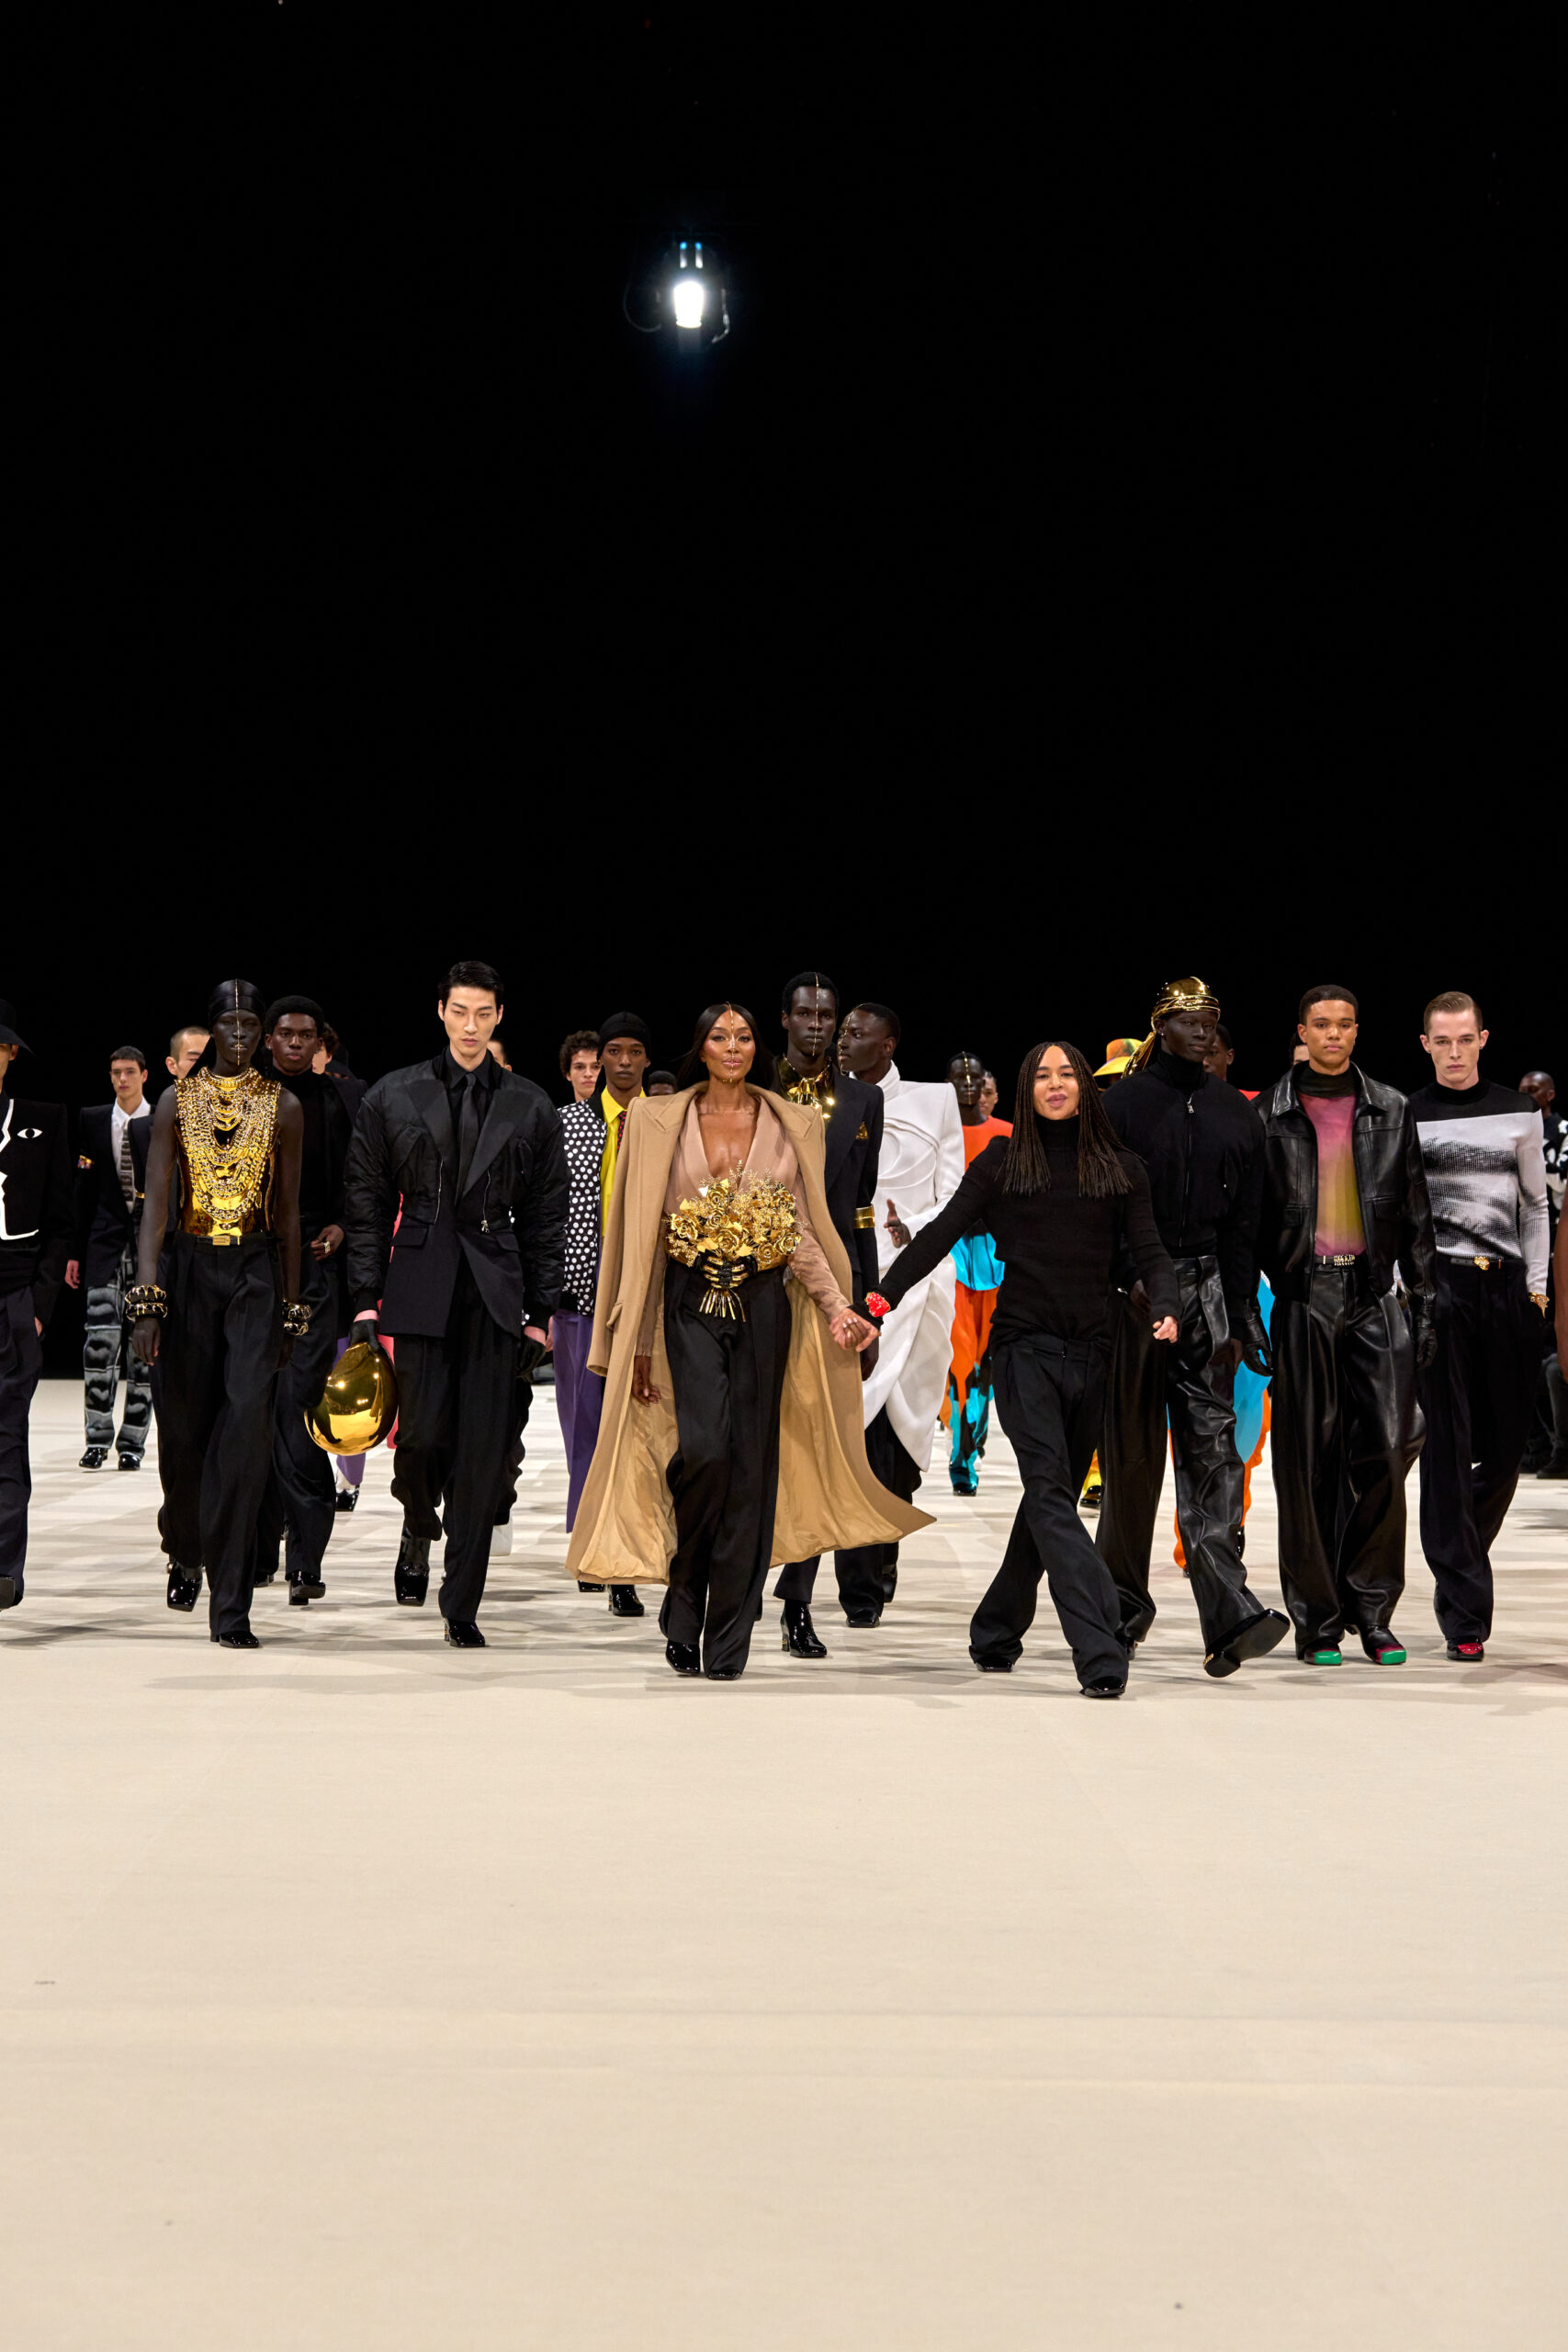 Naomi Campbell leading the finale walk at Balmain's Fall 2024 fashion show with a lineup of models showcasing a fusion of extravagant golden outfits and contemporary styles.